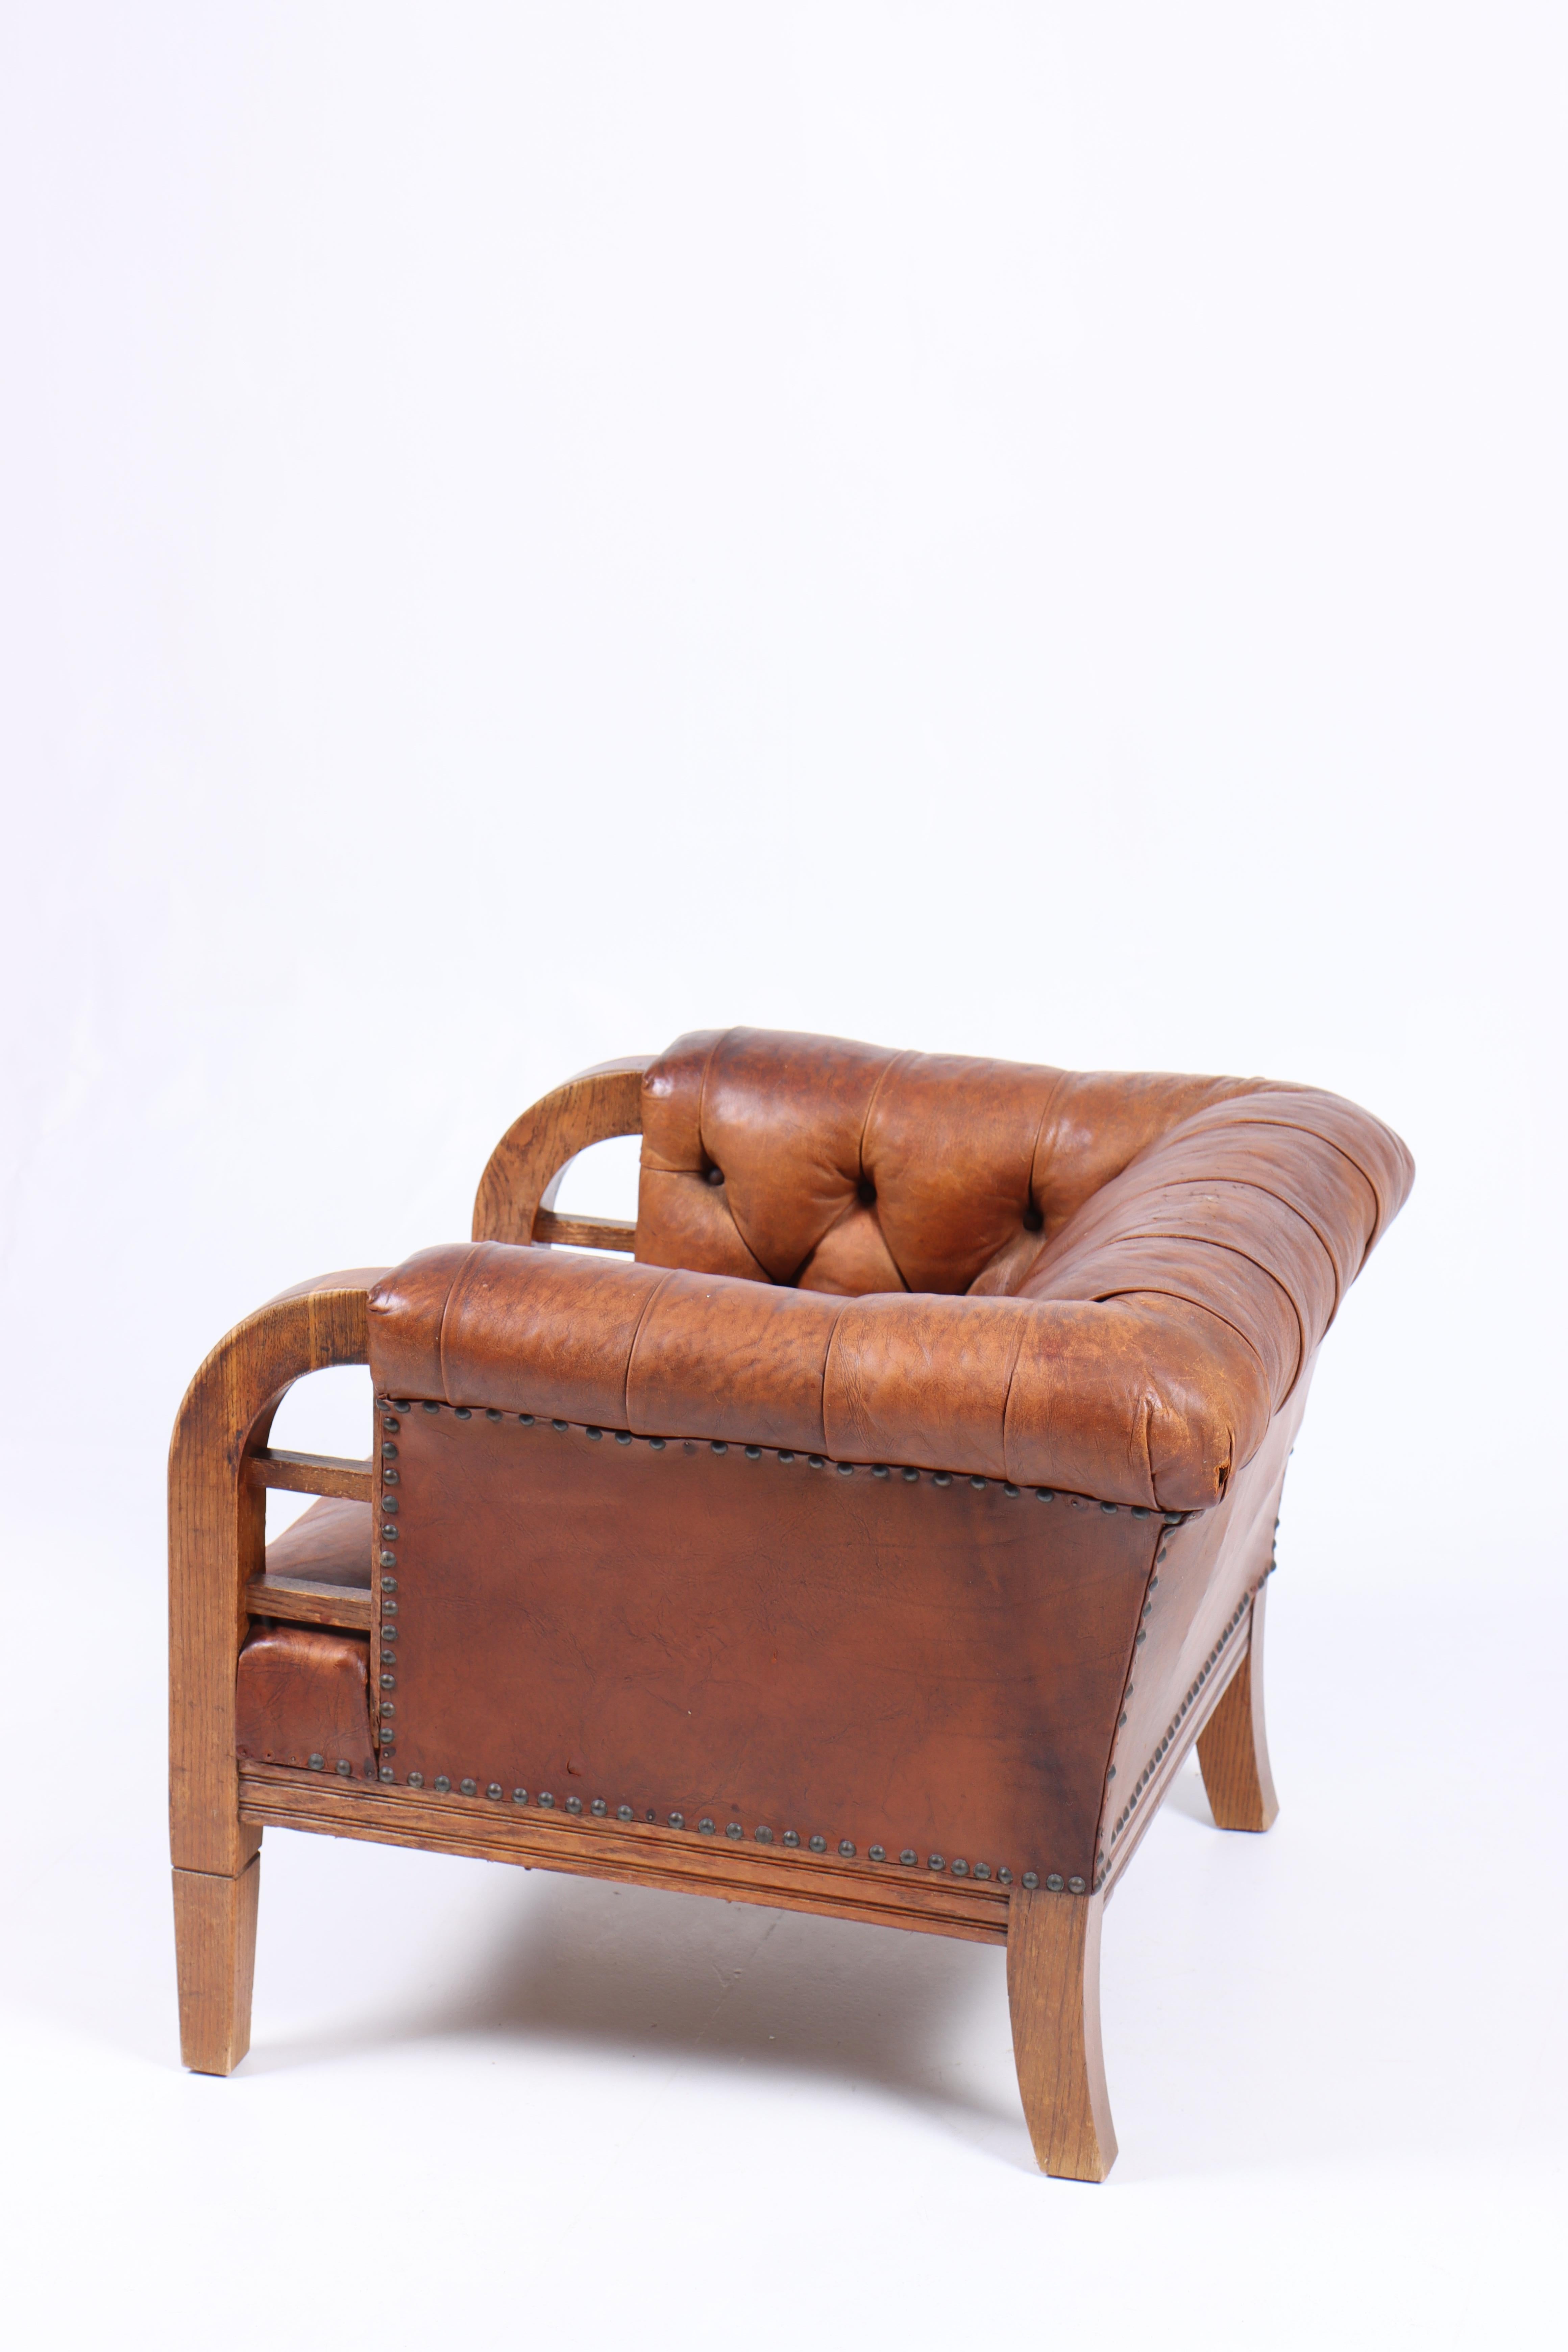 Lounge Chair in Patinated Leather, Made in Denmark, 1940s In Good Condition For Sale In Lejre, DK